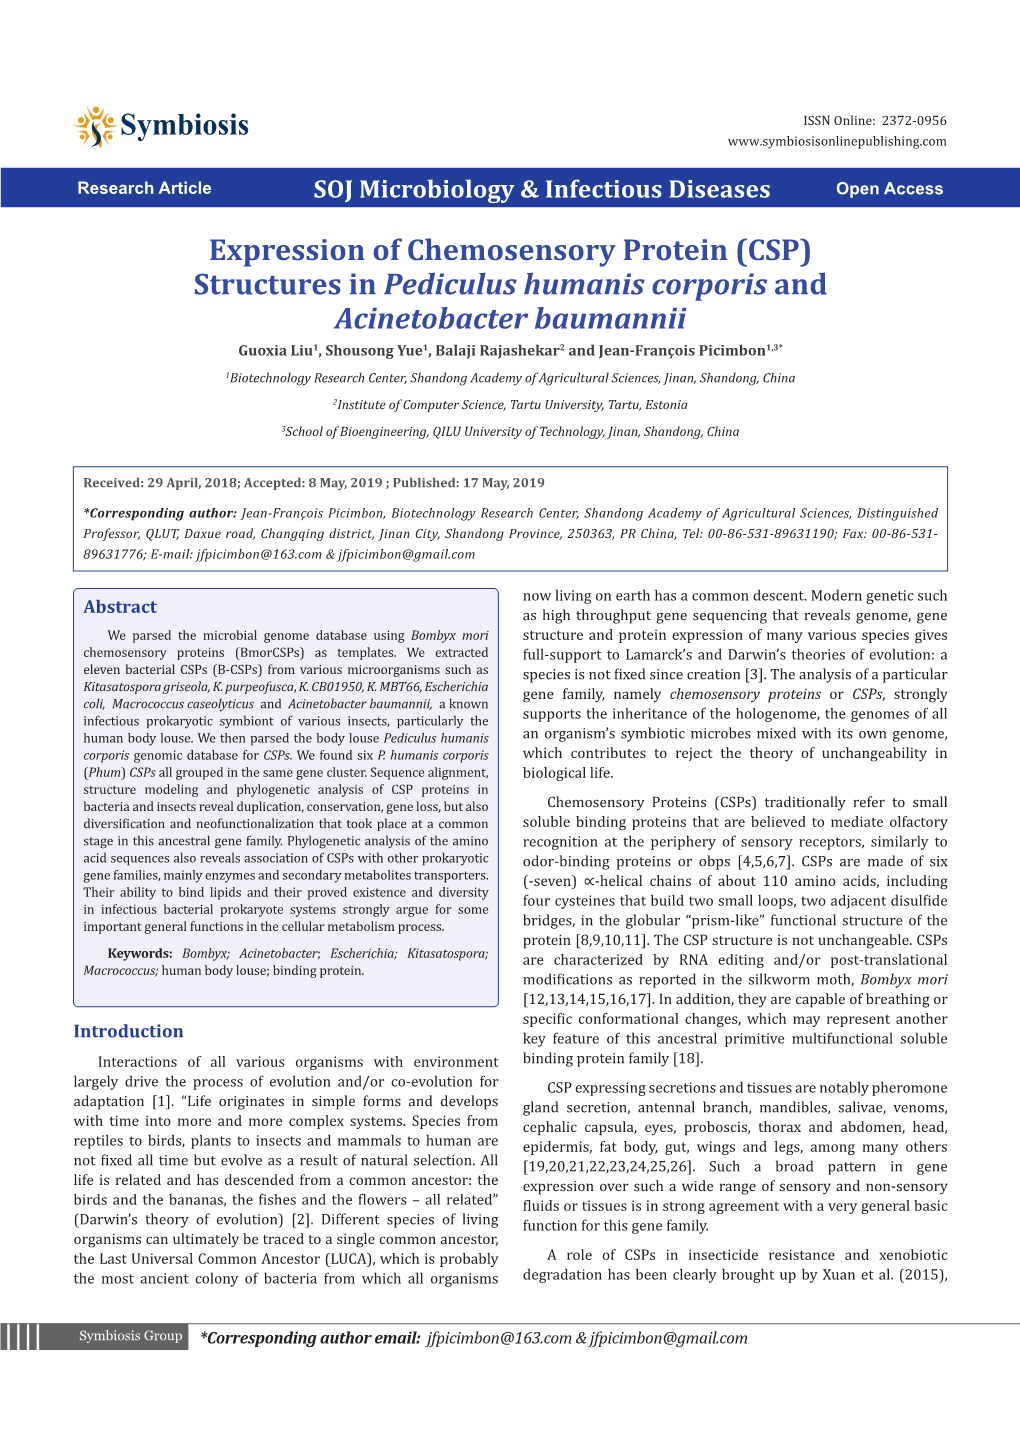 Expression of Chemosensory Protein (CSP)Structures in Pediculus Humanis Corporis Andacinetobacter Baumannii